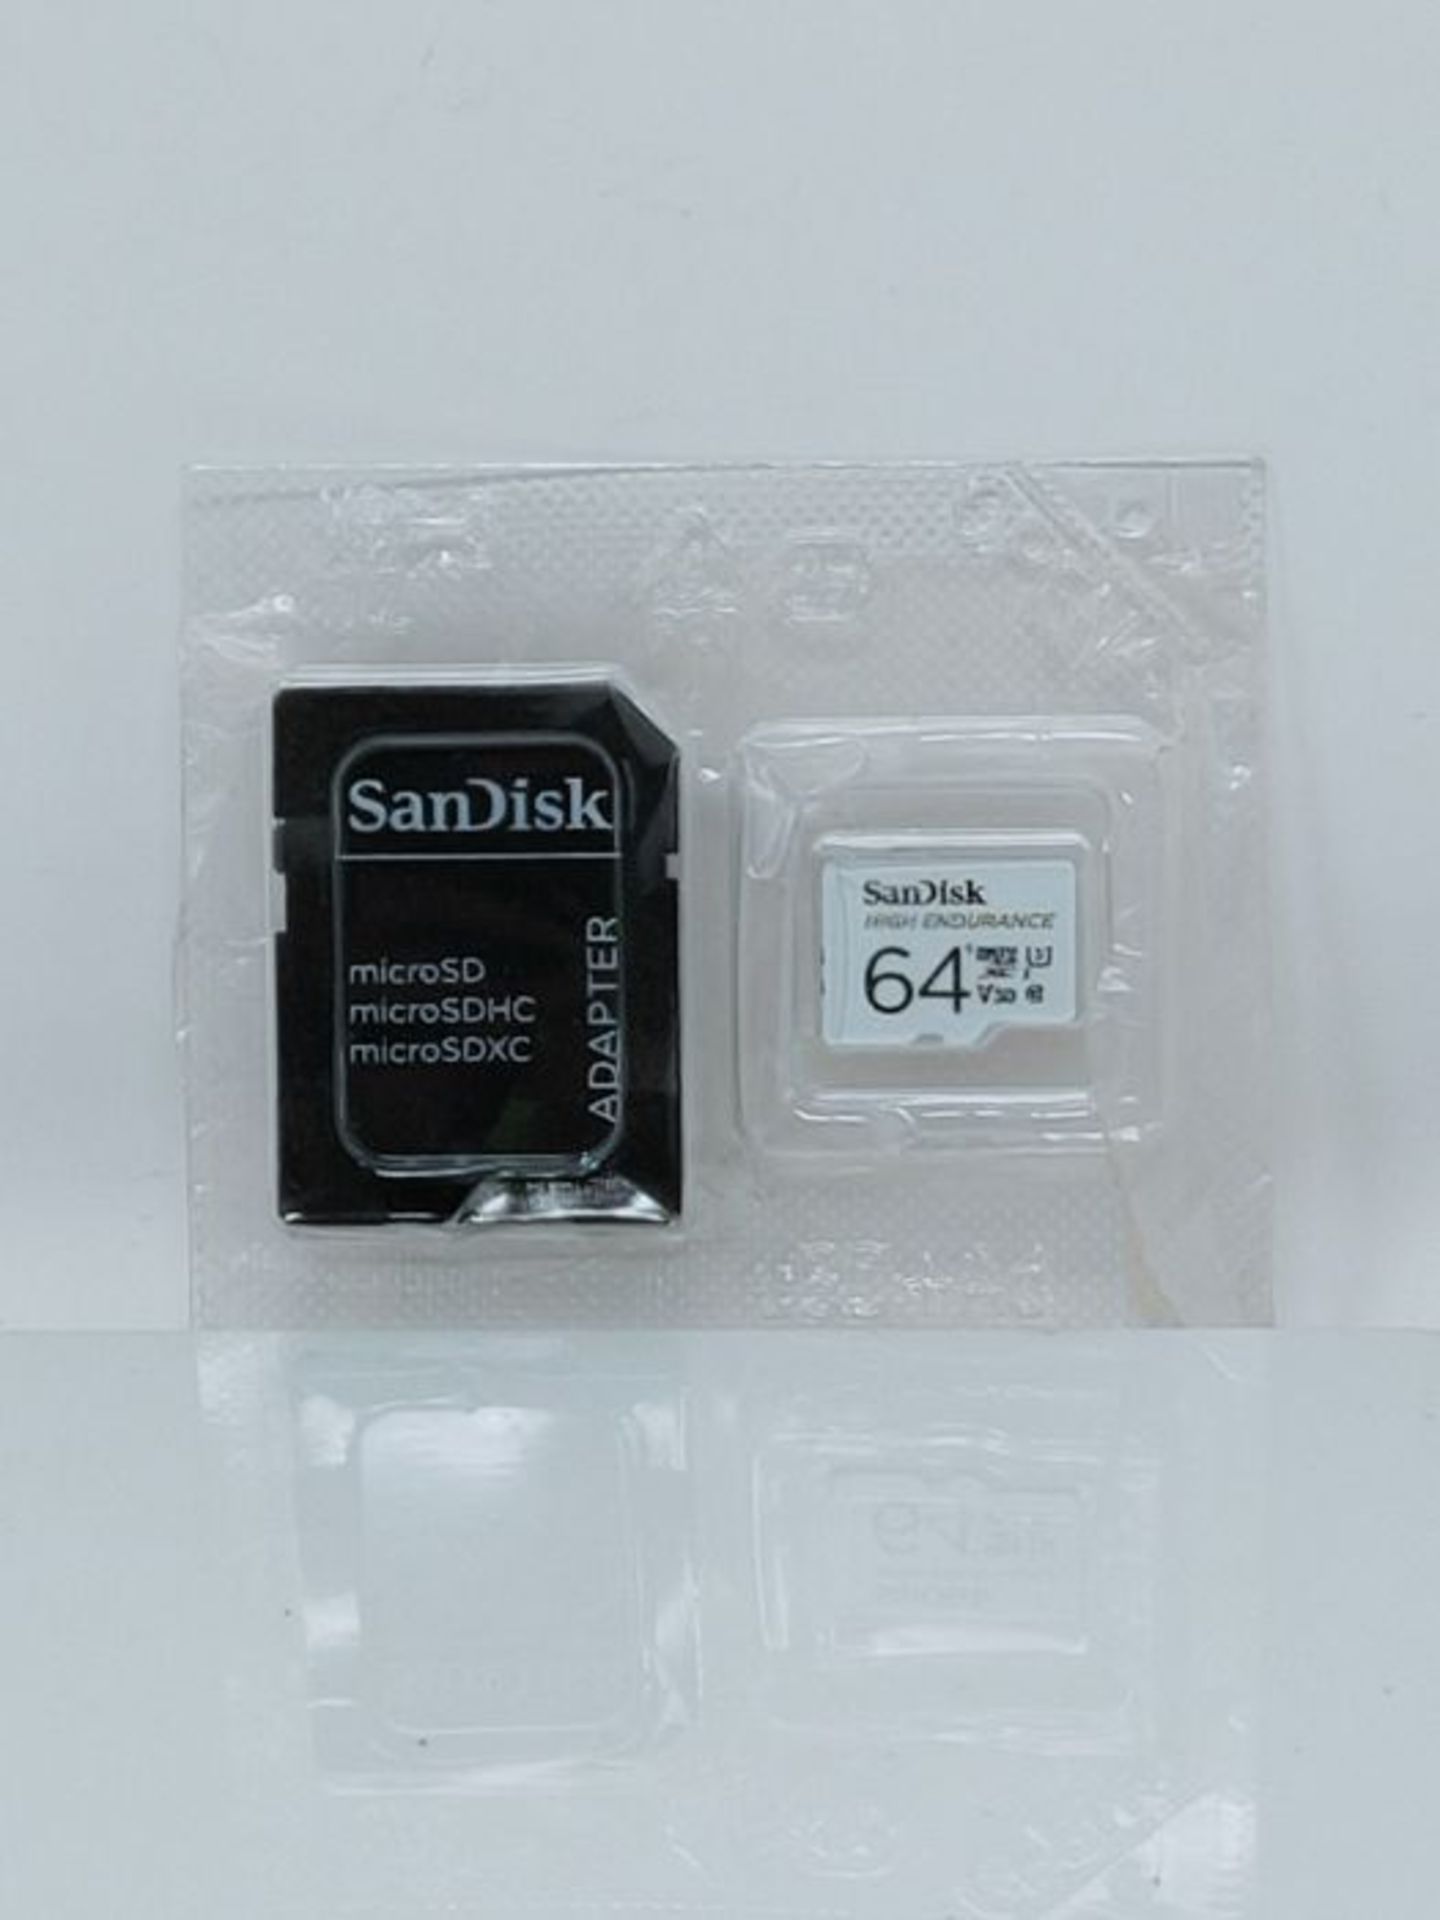 SanDisk HIGH ENDURANCE Video Monitoring for Dashcams & Home Monitoring 64 GB microSDXC - Image 2 of 3